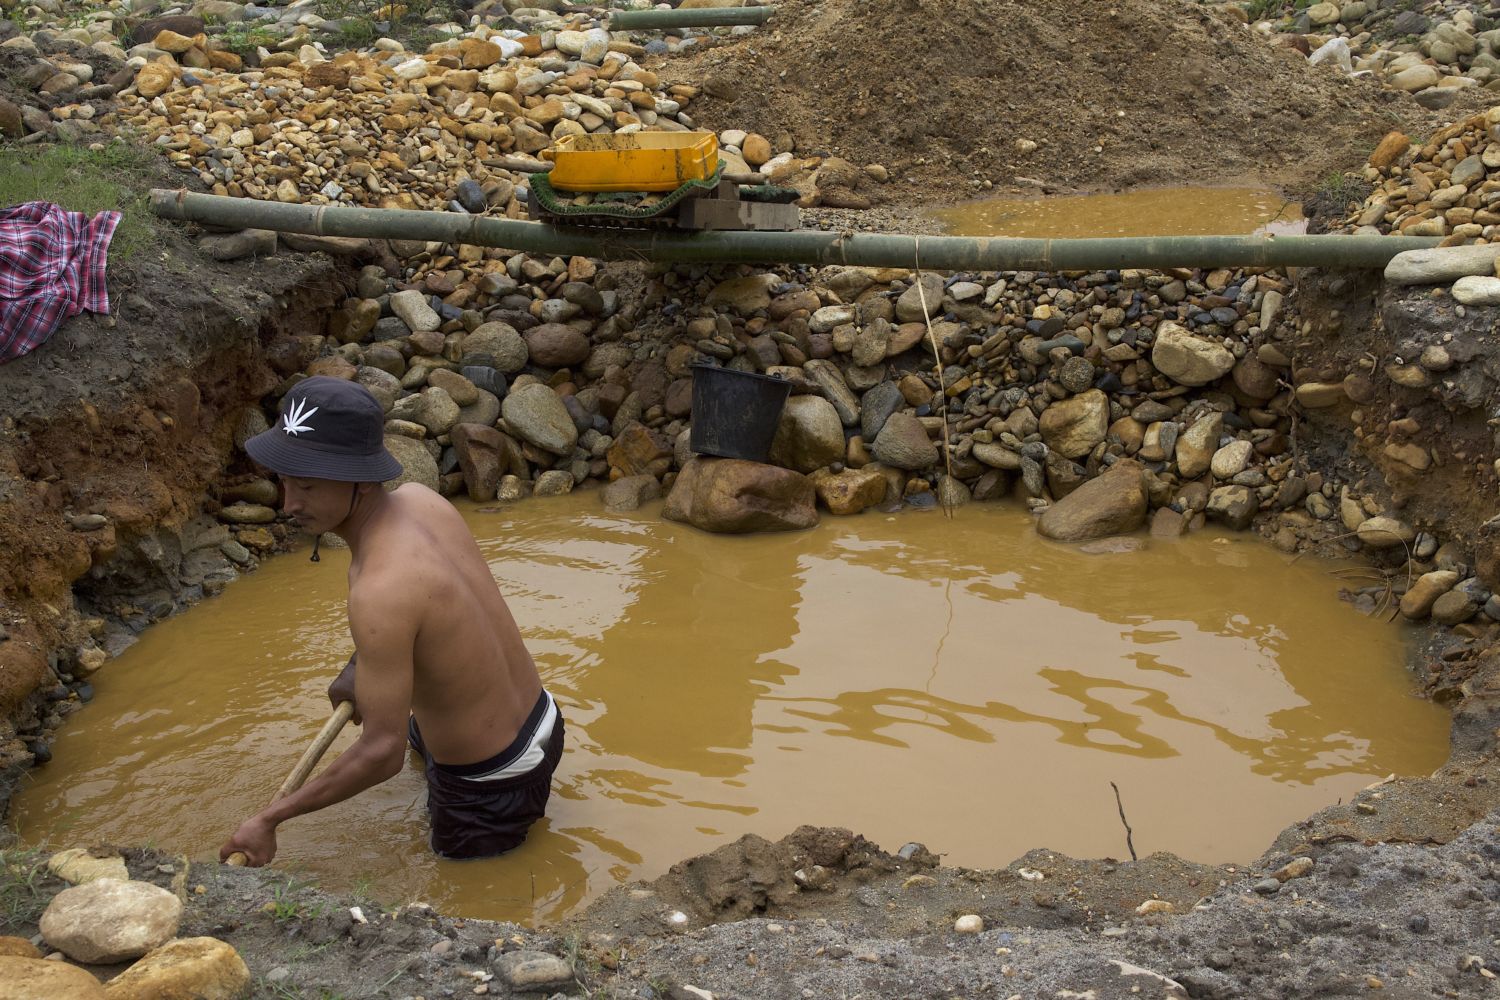 A miner digs a trench to pan for gold near the Mali River